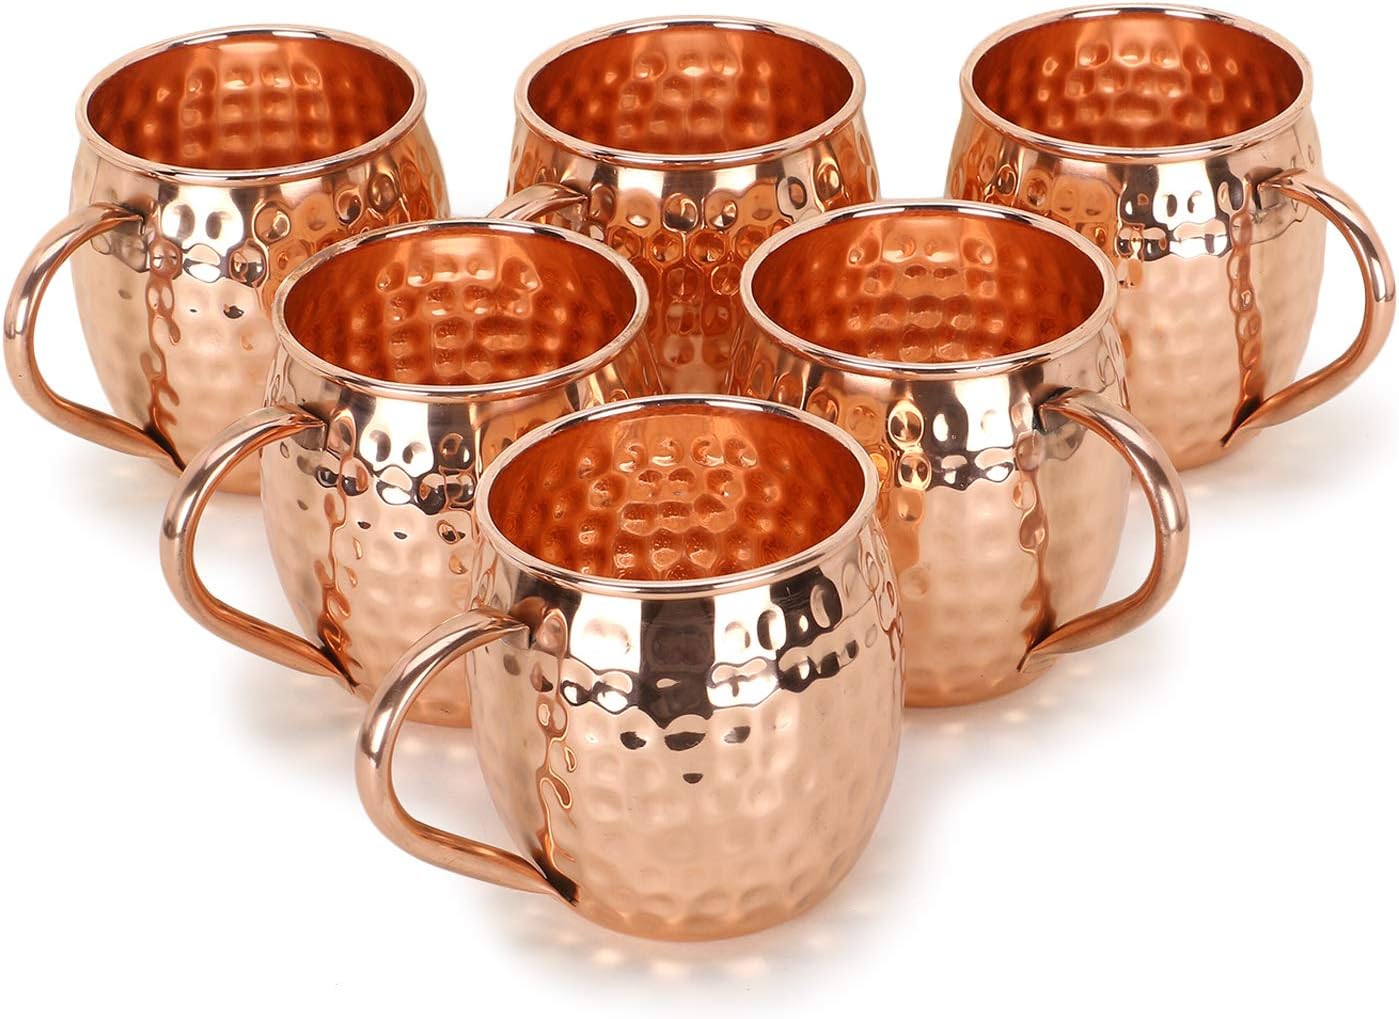 Moscow Mule - Copper Mugs